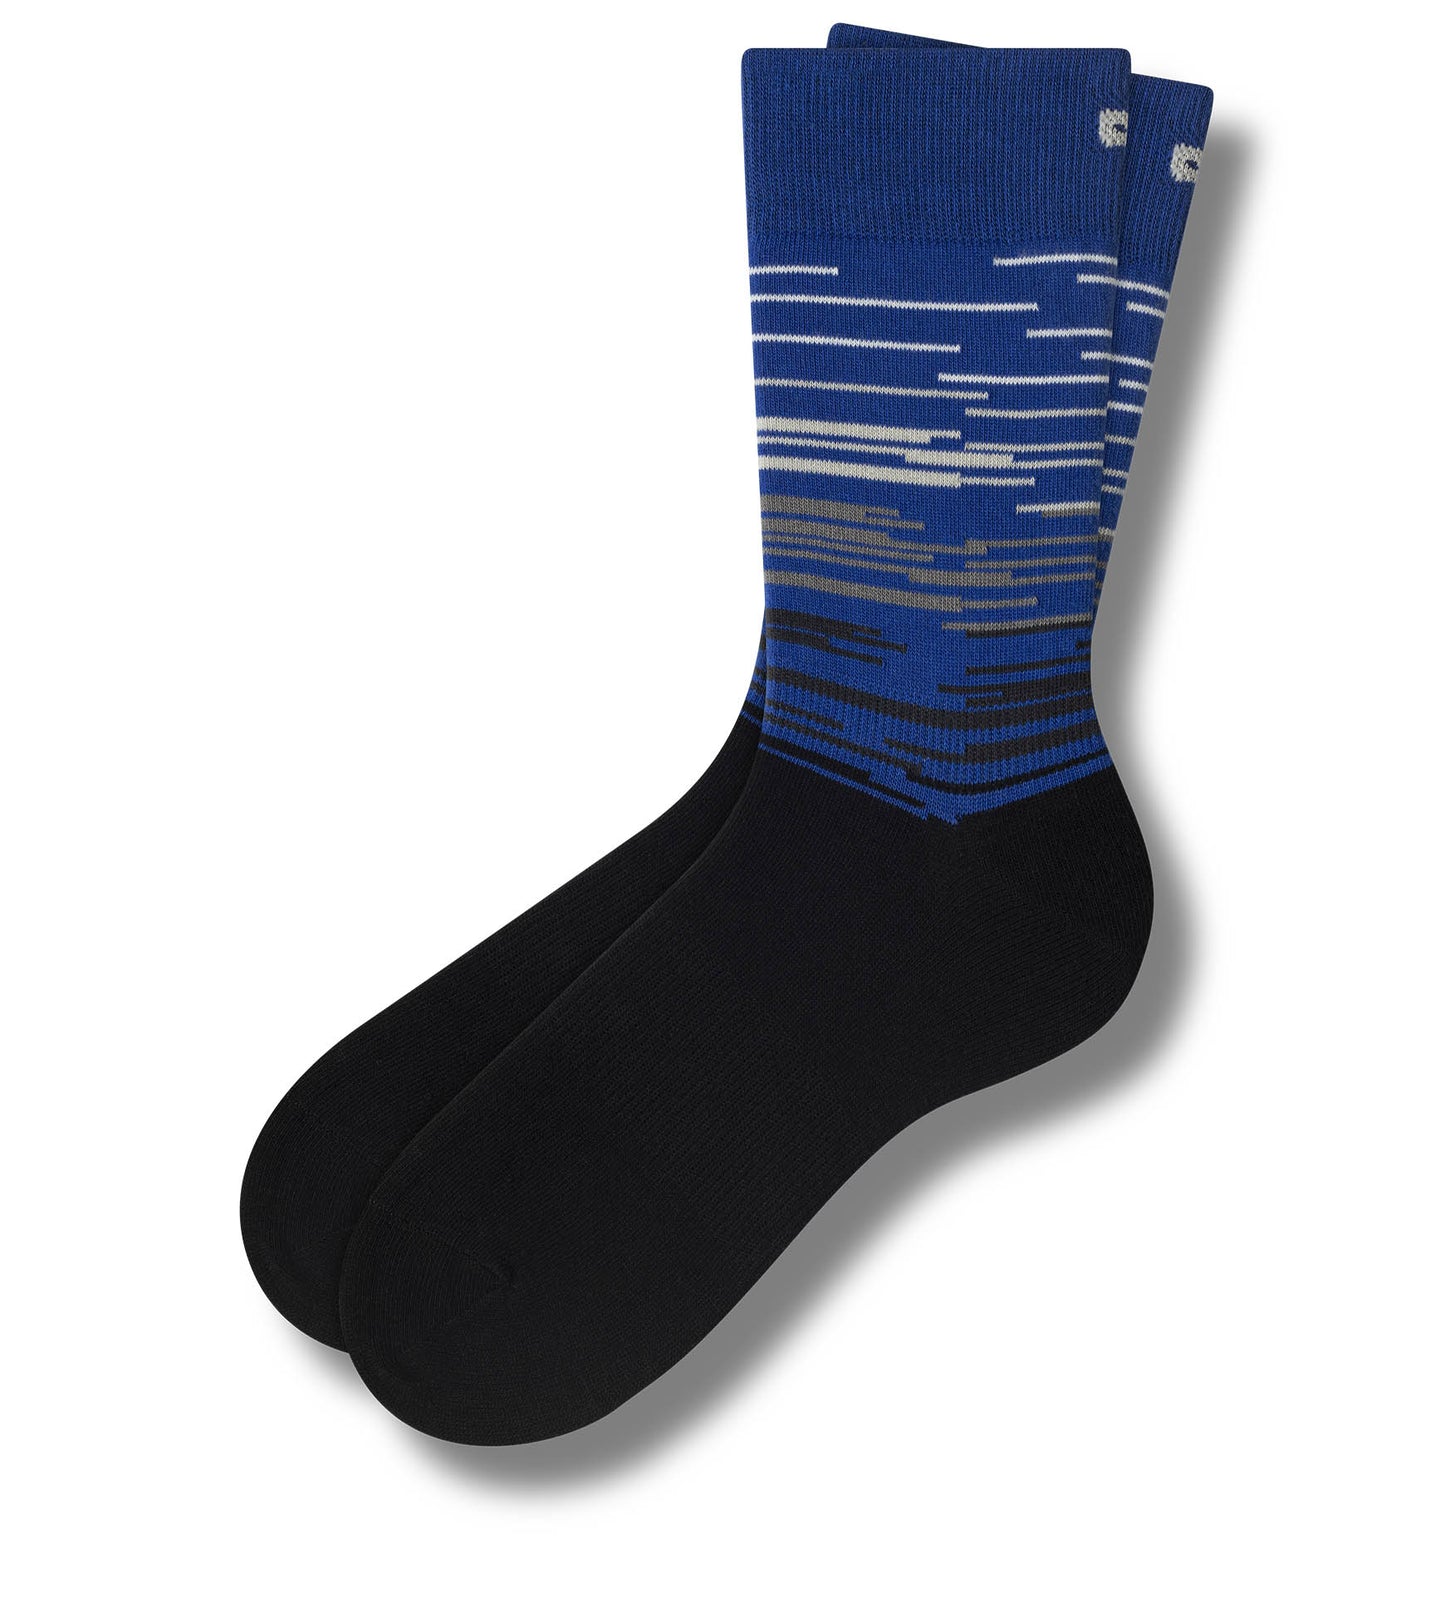 Crew Socks white and grey lines on blue